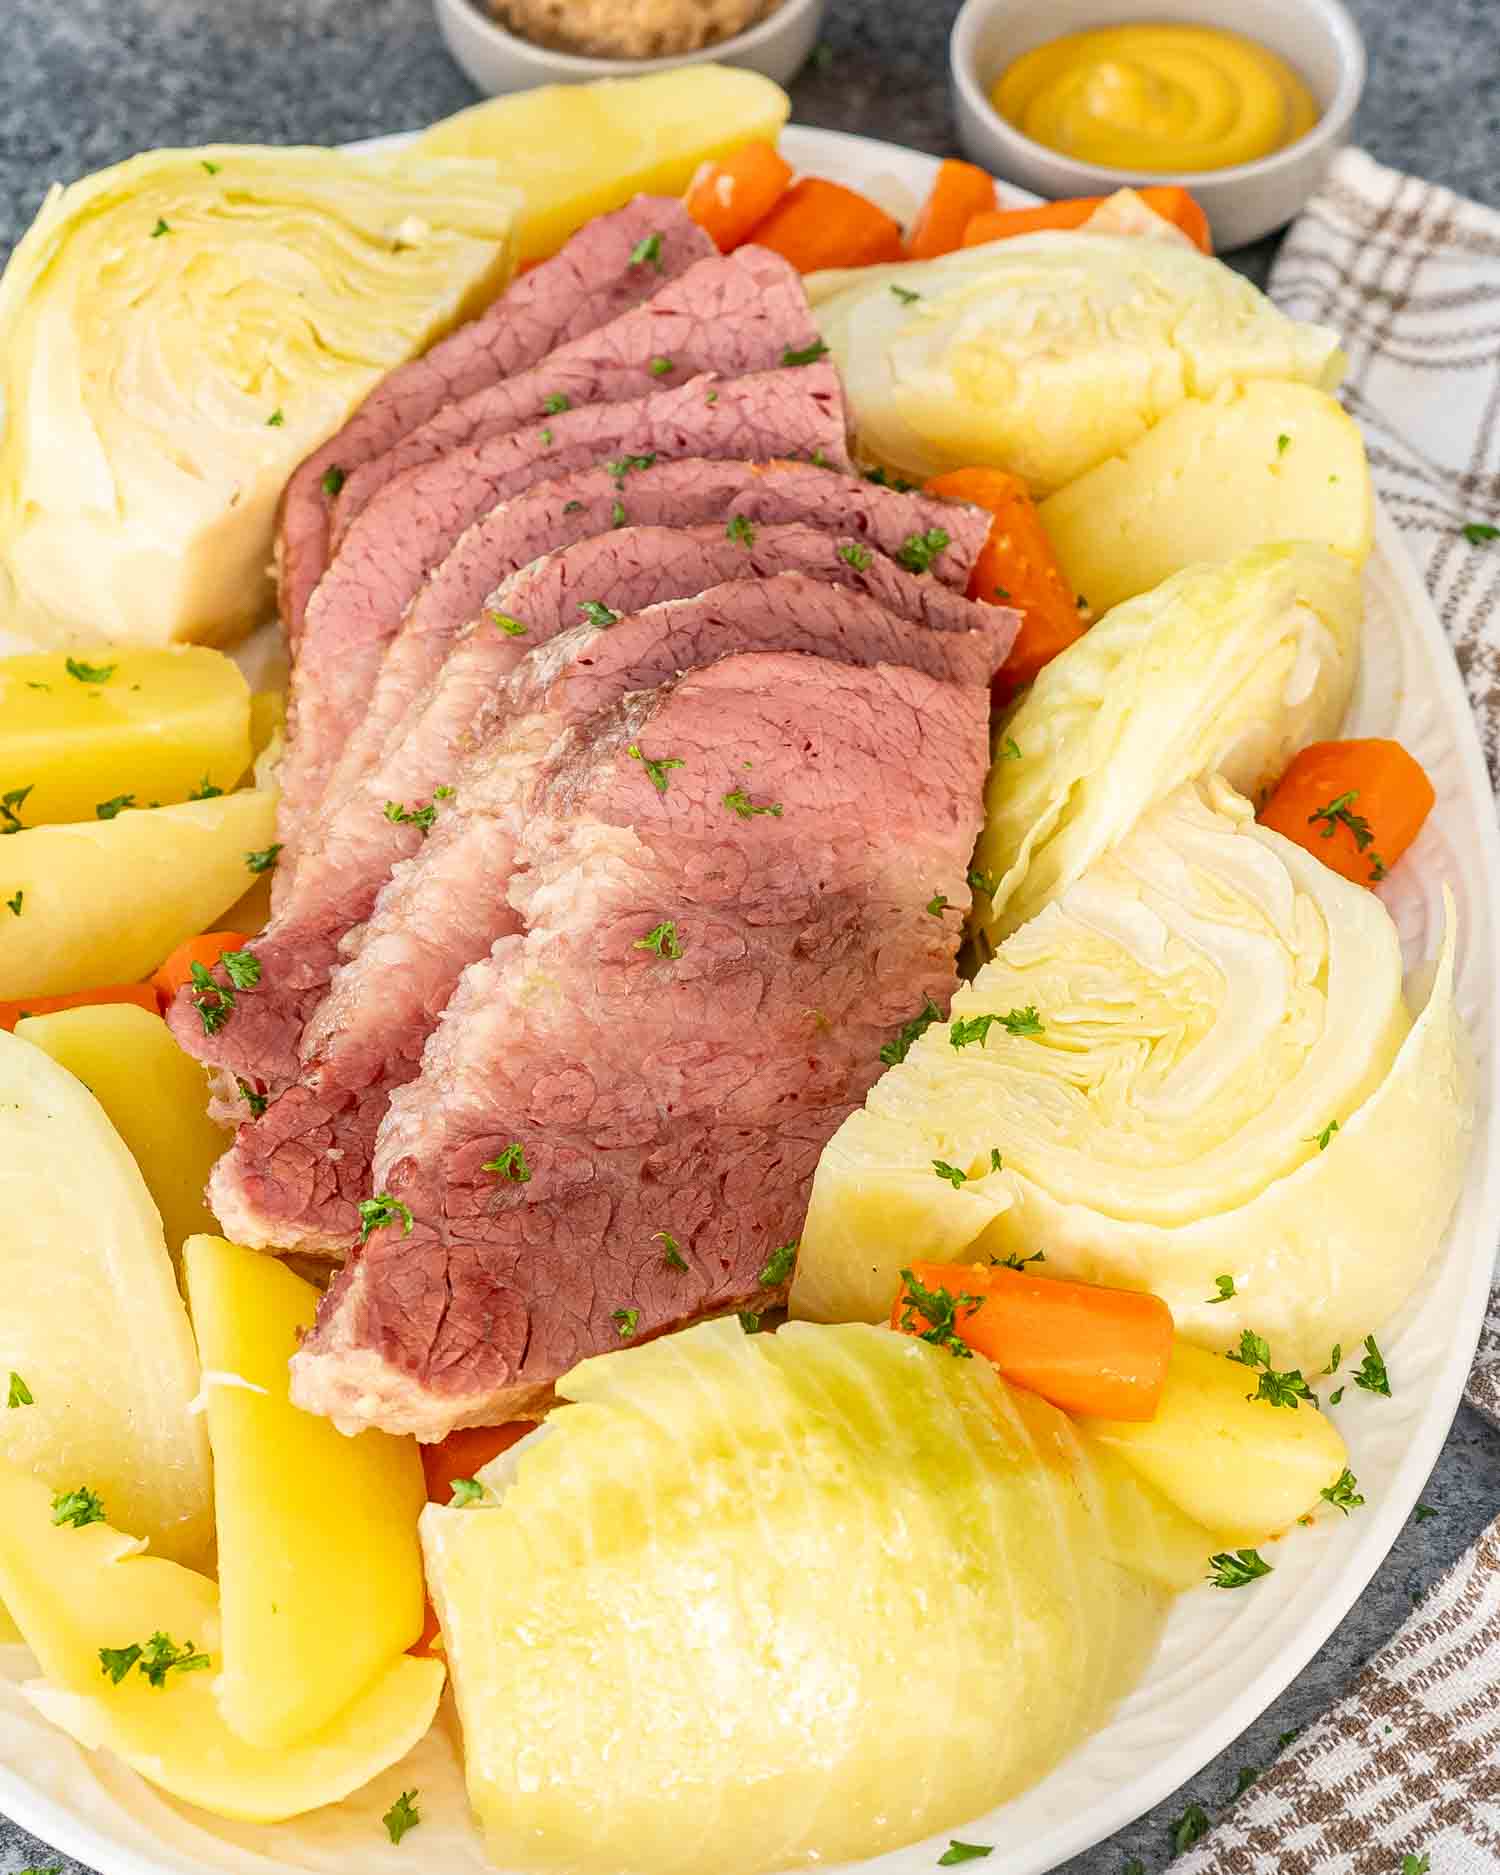 a platter with corned beef and cabbage and potatoes and carrots.